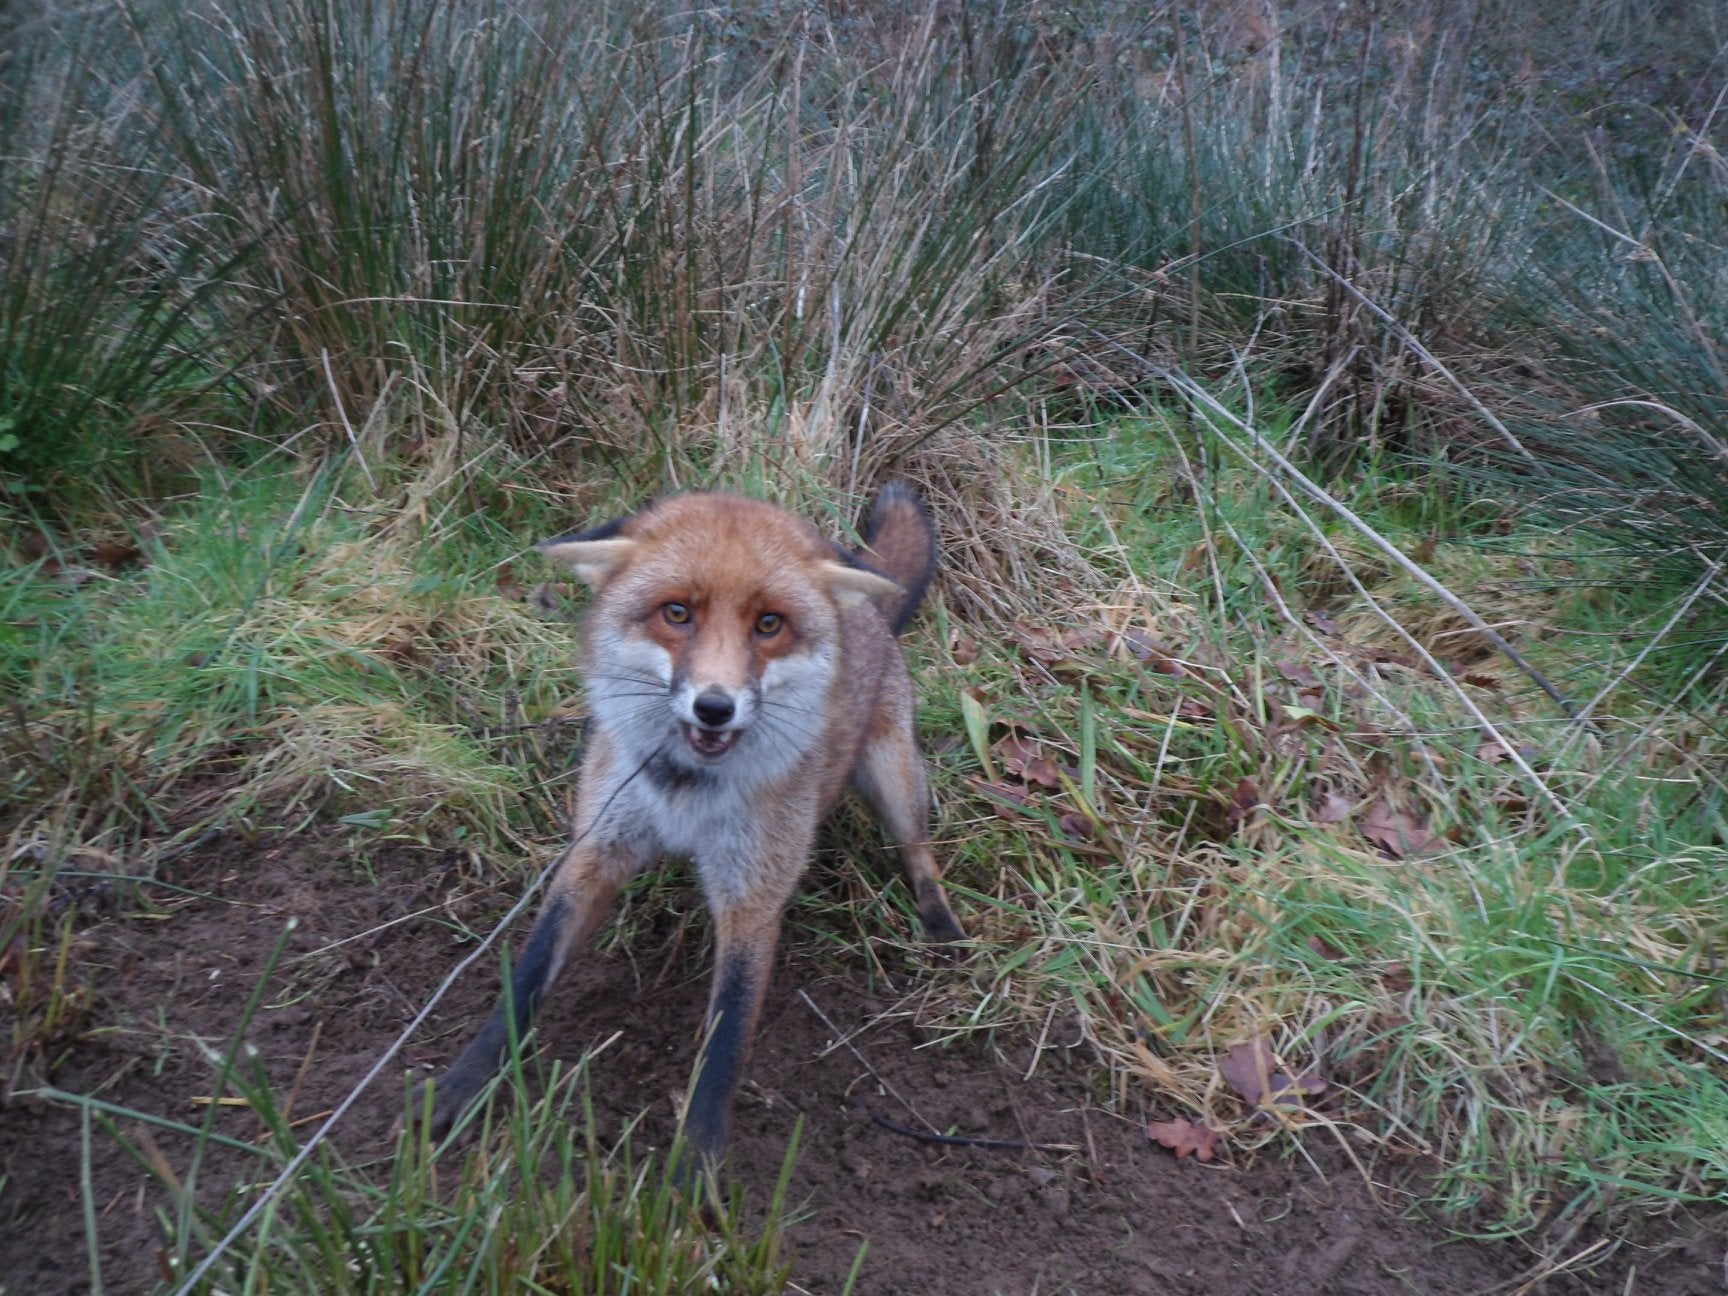 Mr Sneade photographed this fox caught in one of his snares